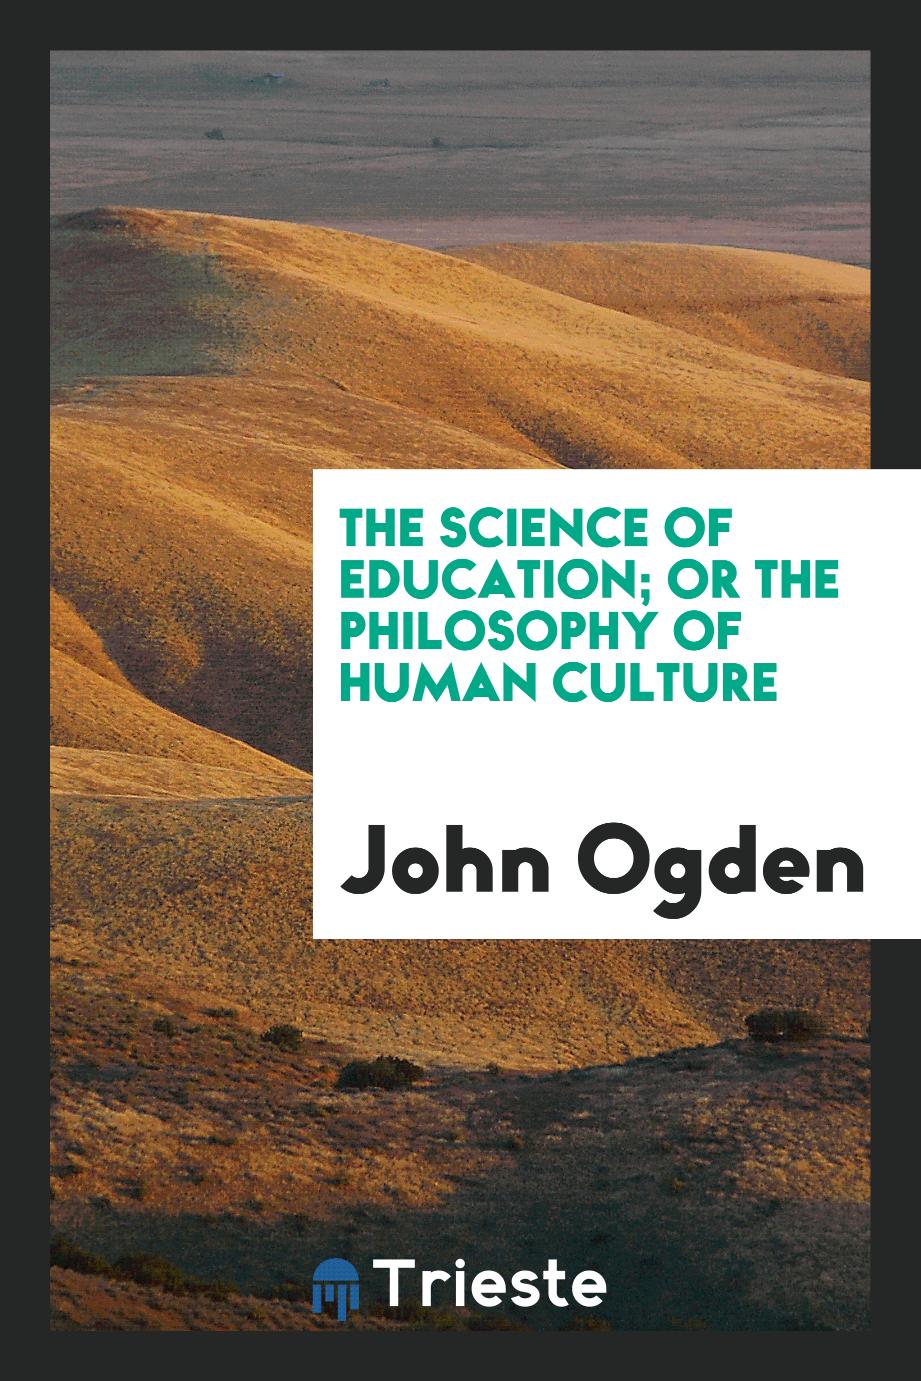 The Science of Education; or the Philosophy of Human Culture